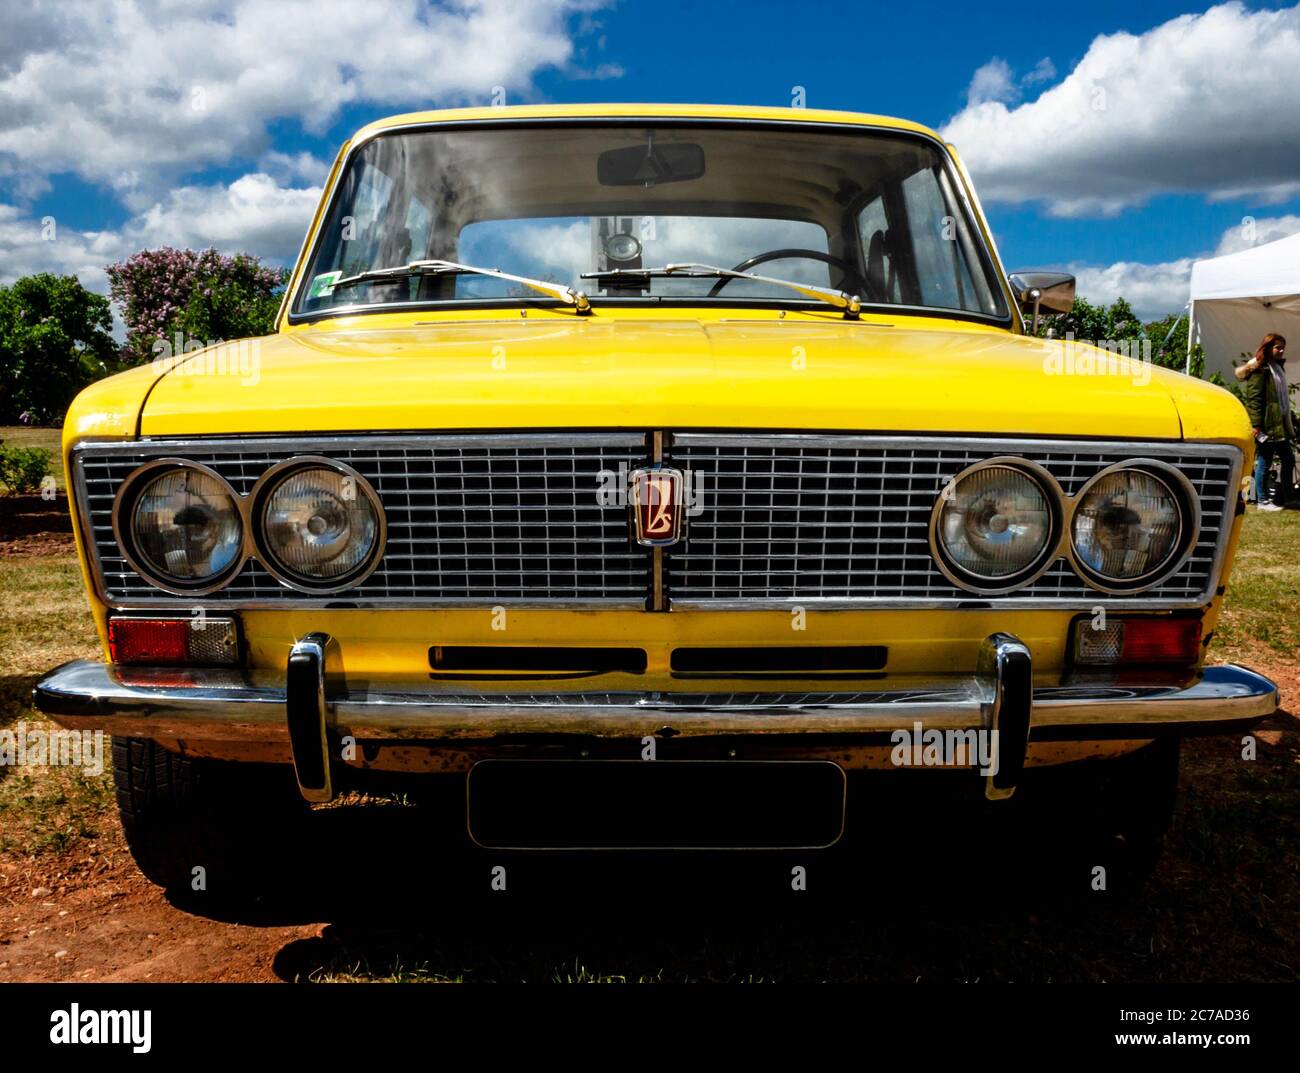 Front of yellow Soviet Lada passenger car displayed during annual Lilac festival in Dobele. Stock Photo